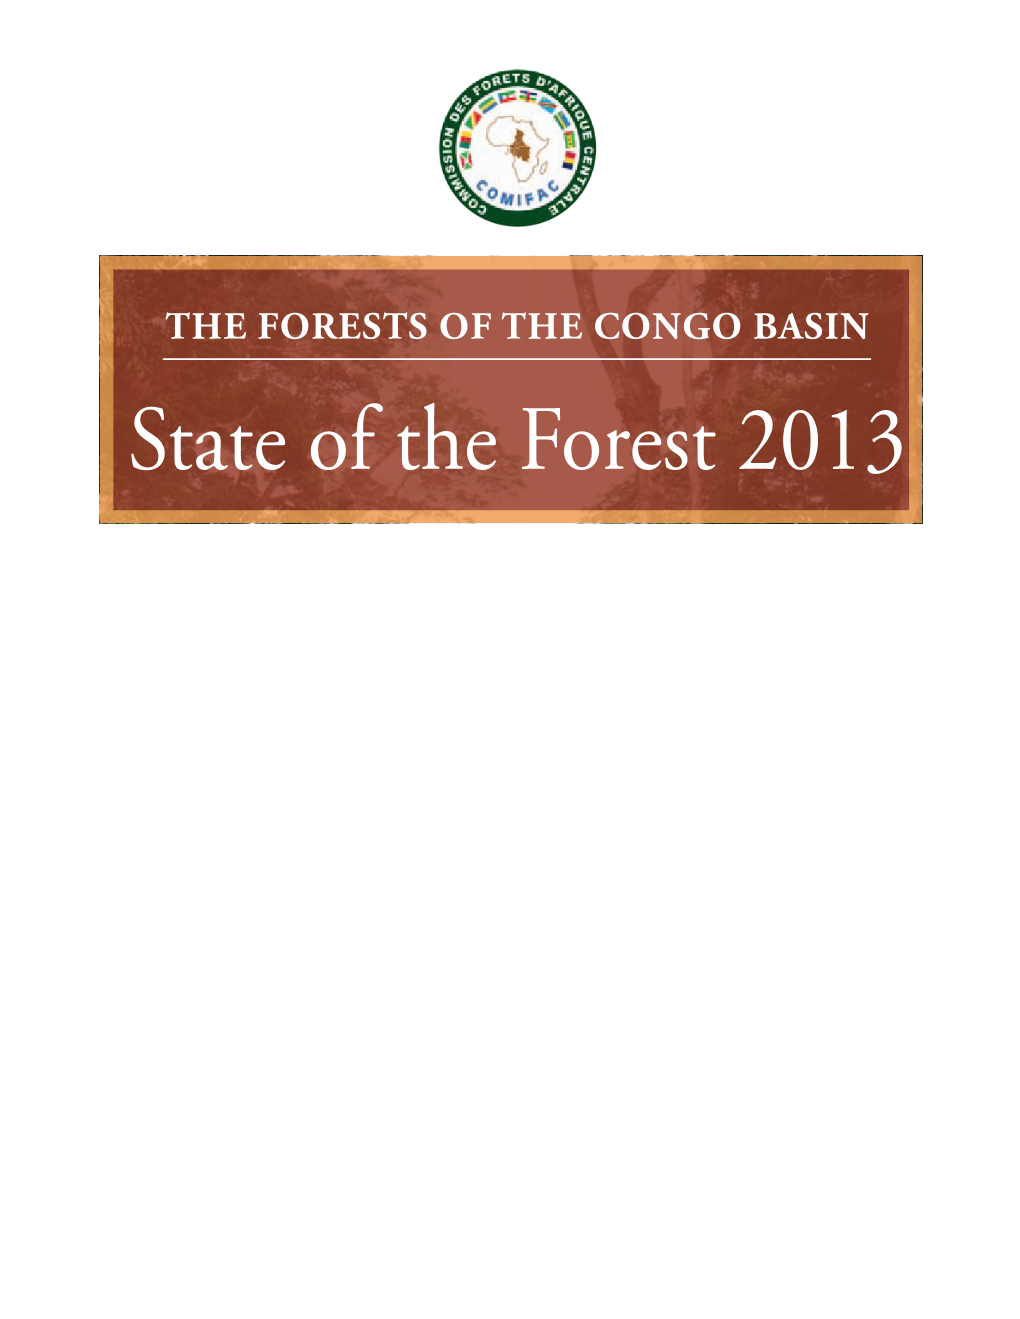 State of the Forest 2013 the Forests of the Congo Basin – State of the Forest 2013